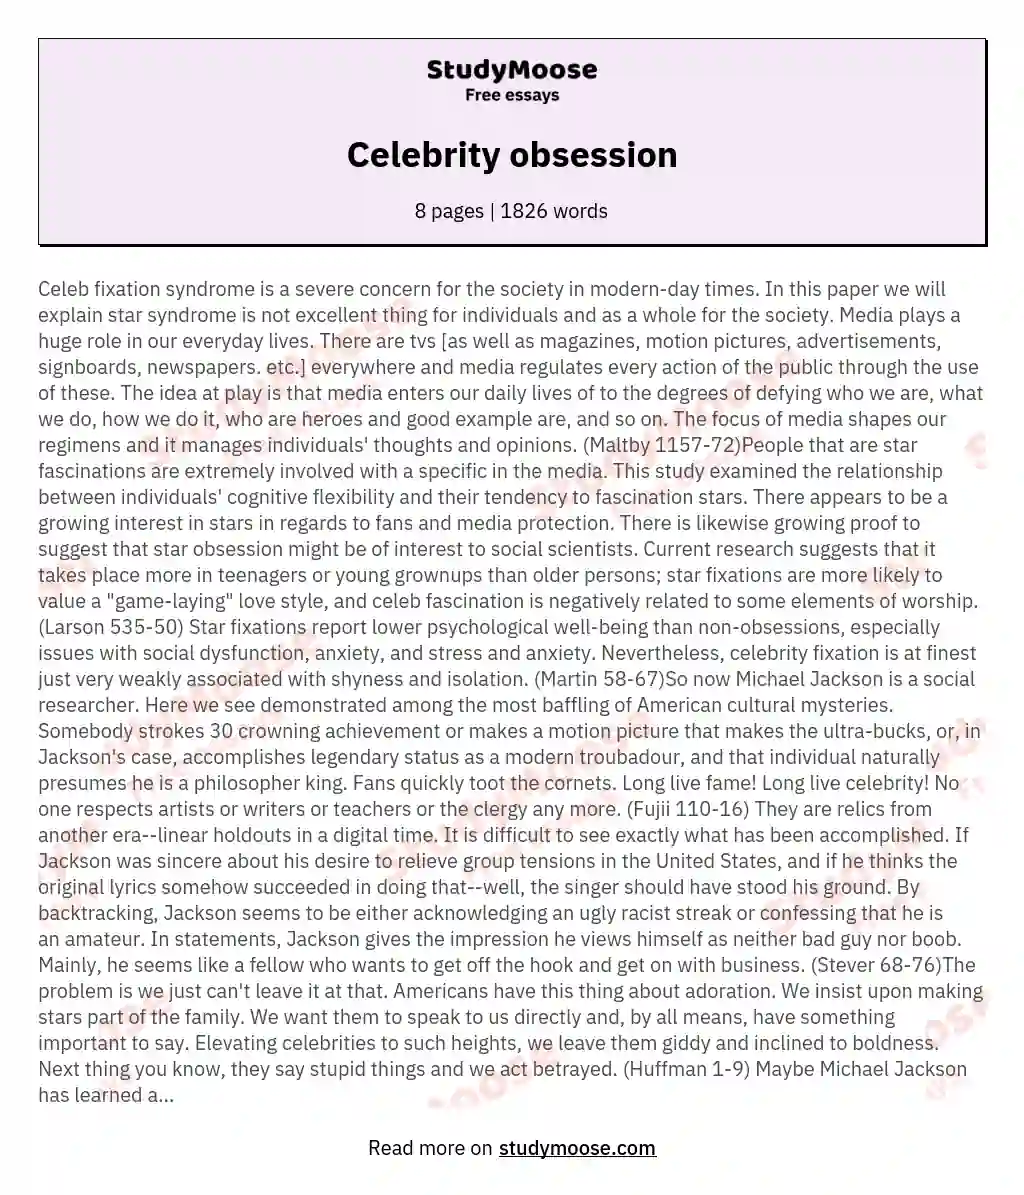 Celebrity obsession essay